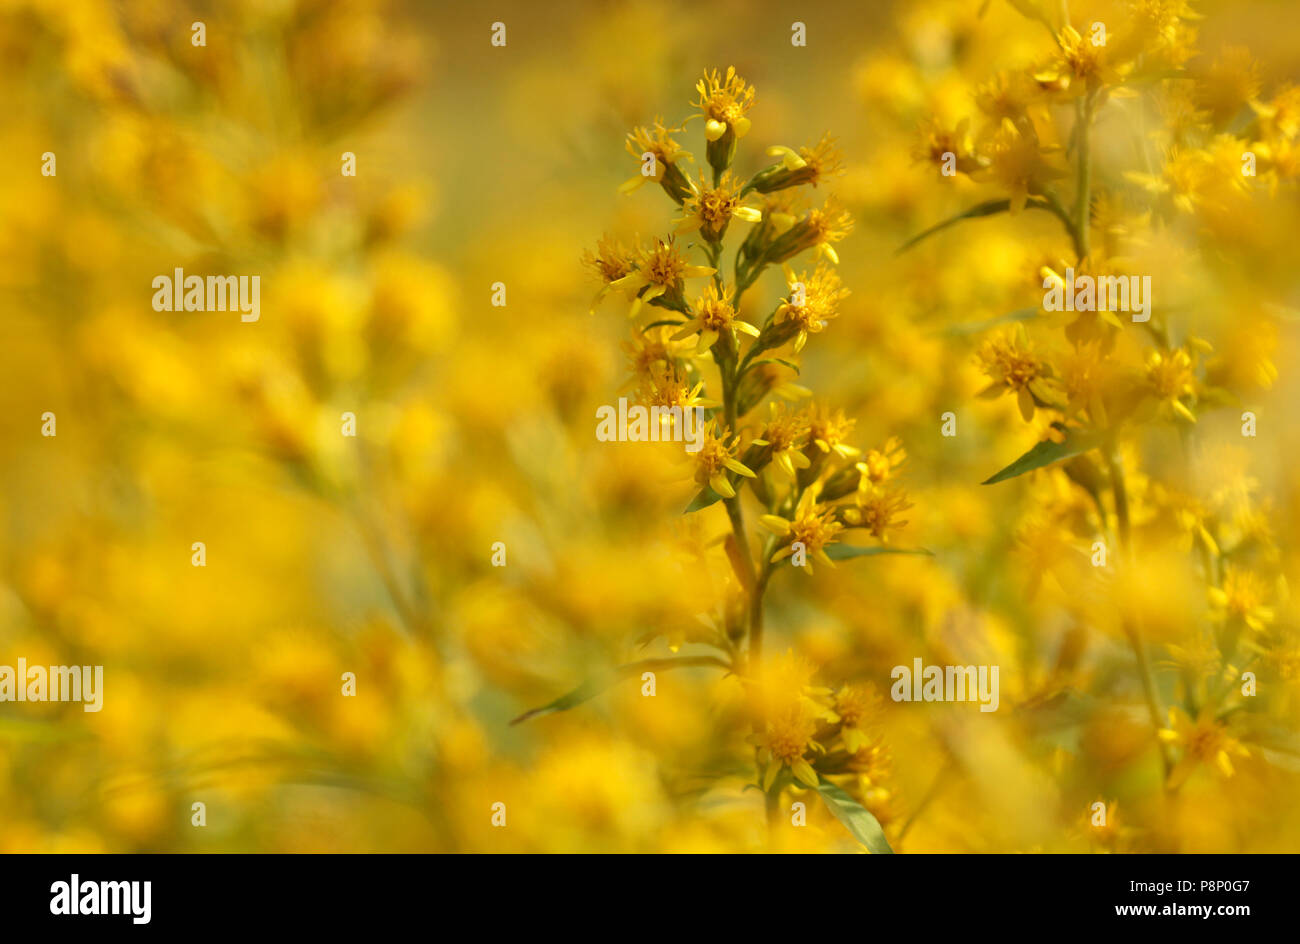 Detail of the yellow flowers of Golden rod Stock Photo